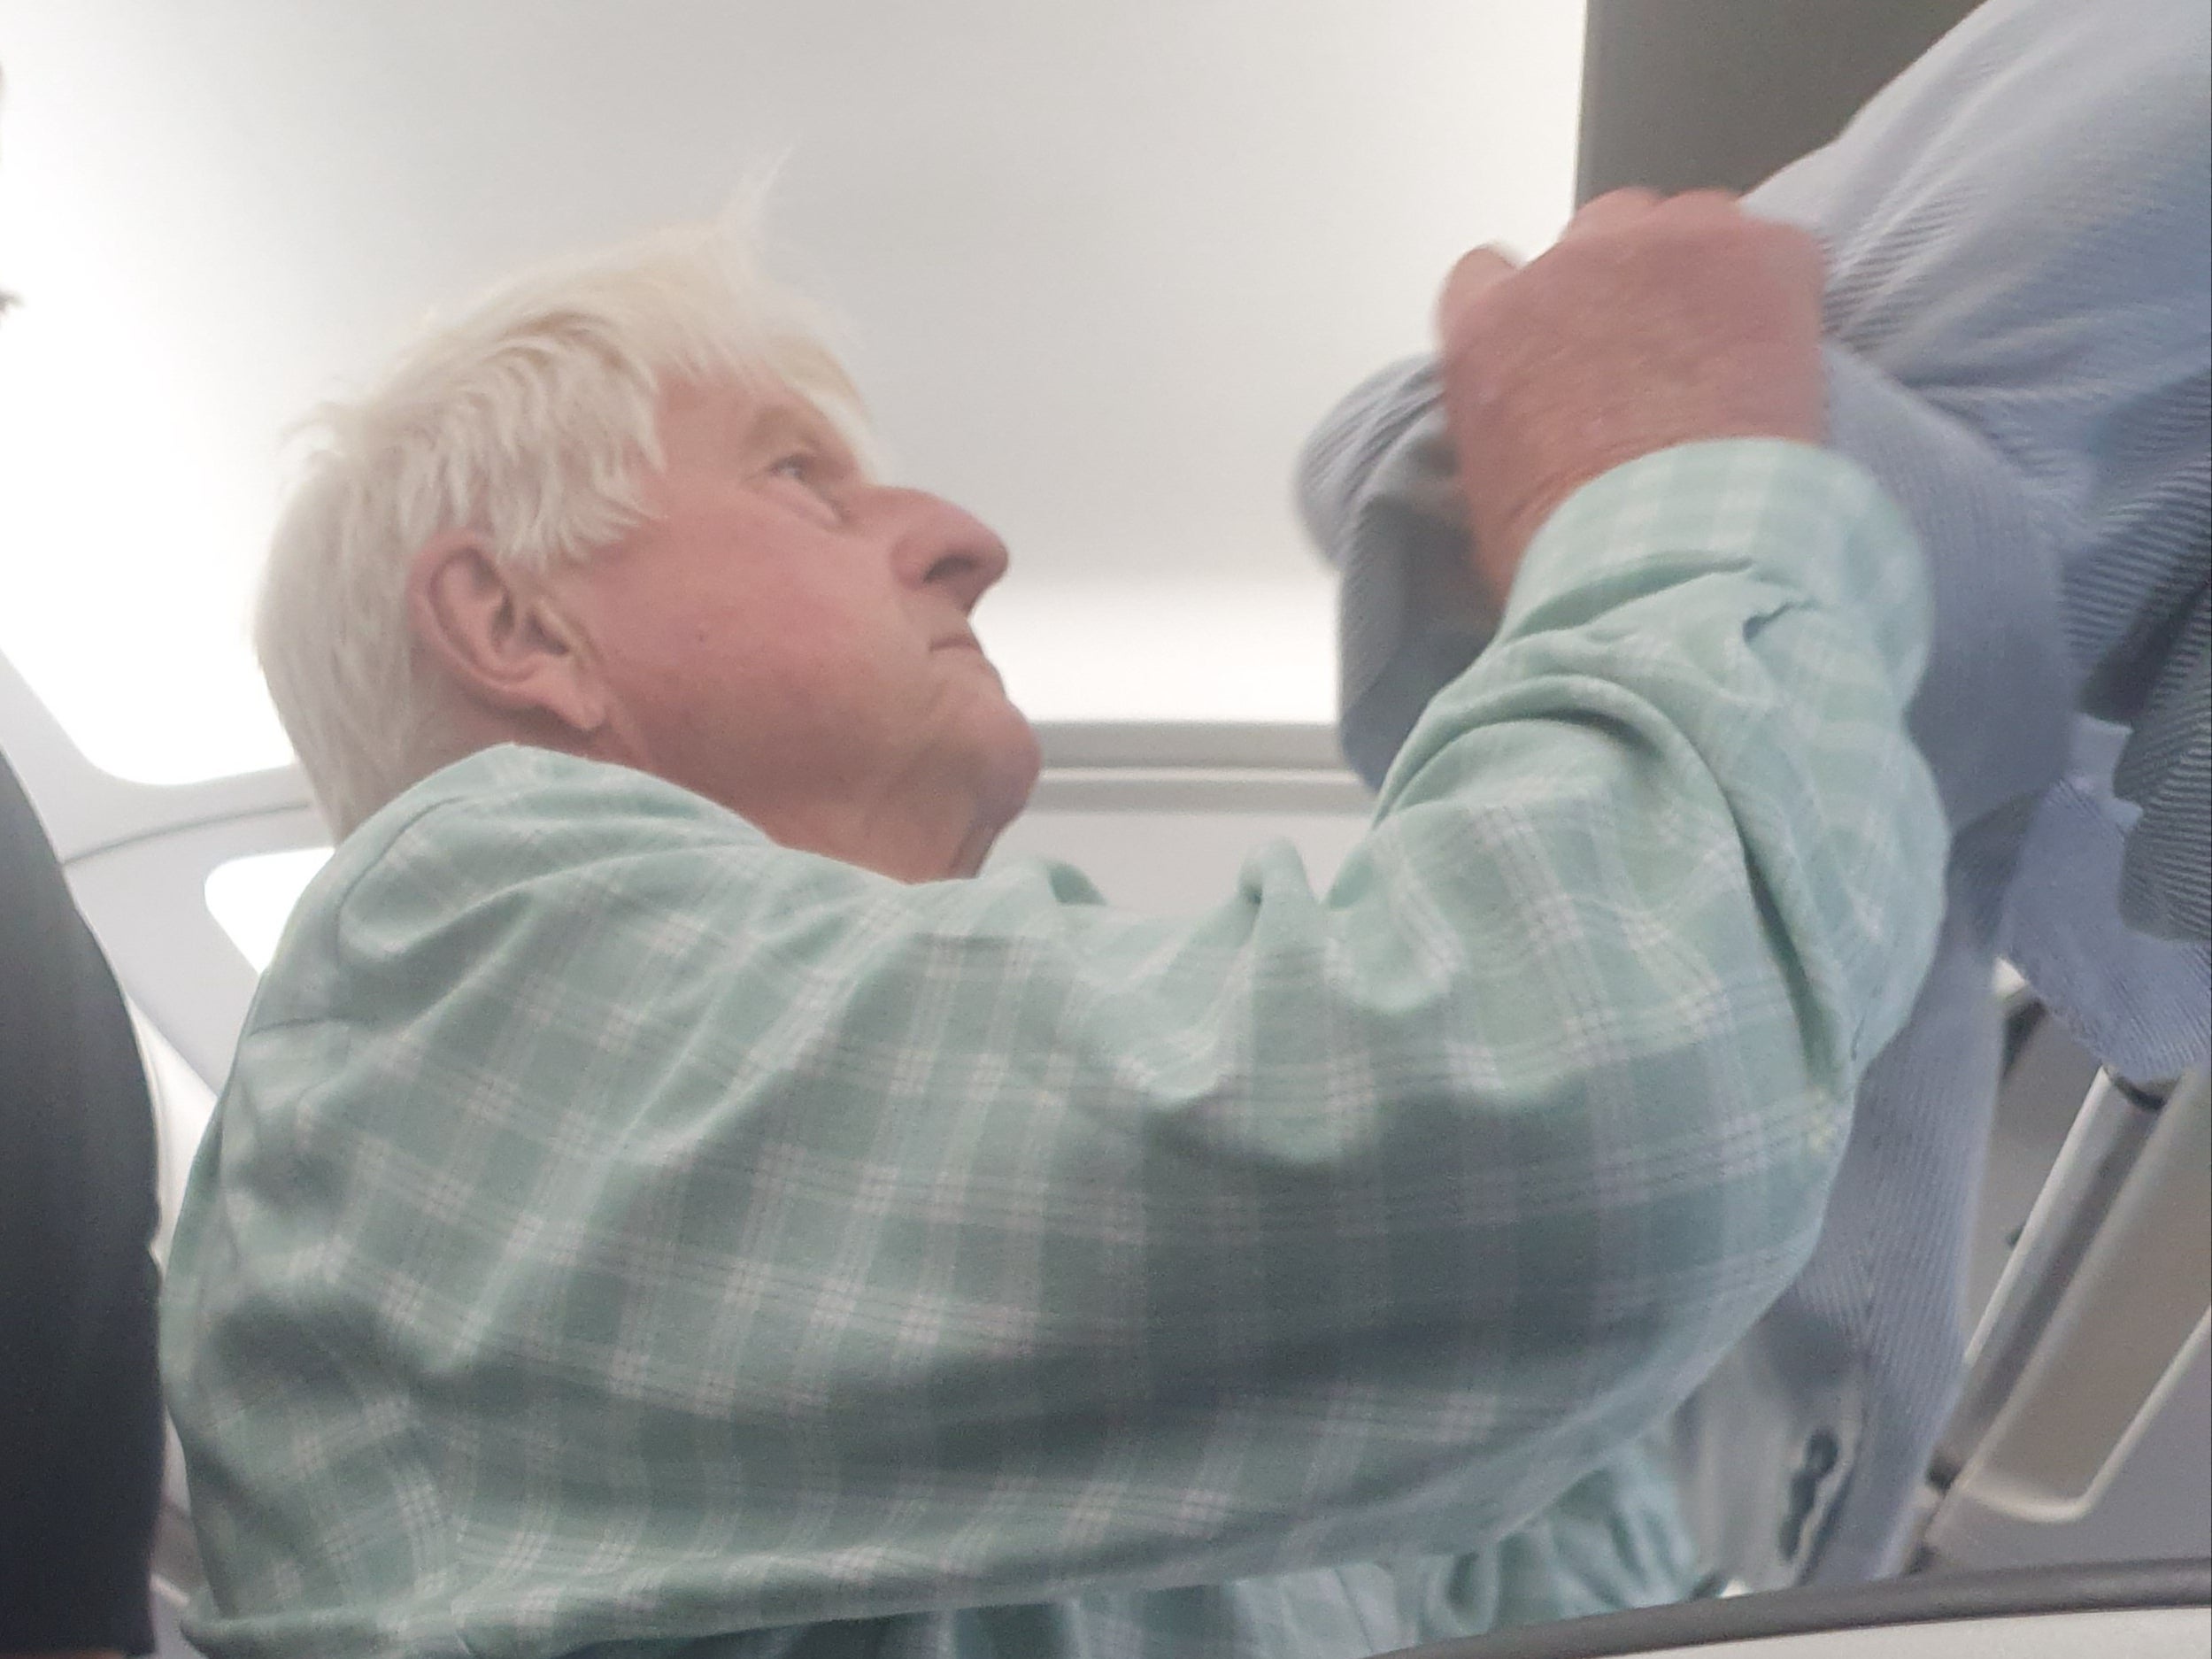 Departing soon: Stanley Johnson preparing to leave British Airways flight 2461 from Malaga, which was diverted to Heathrow